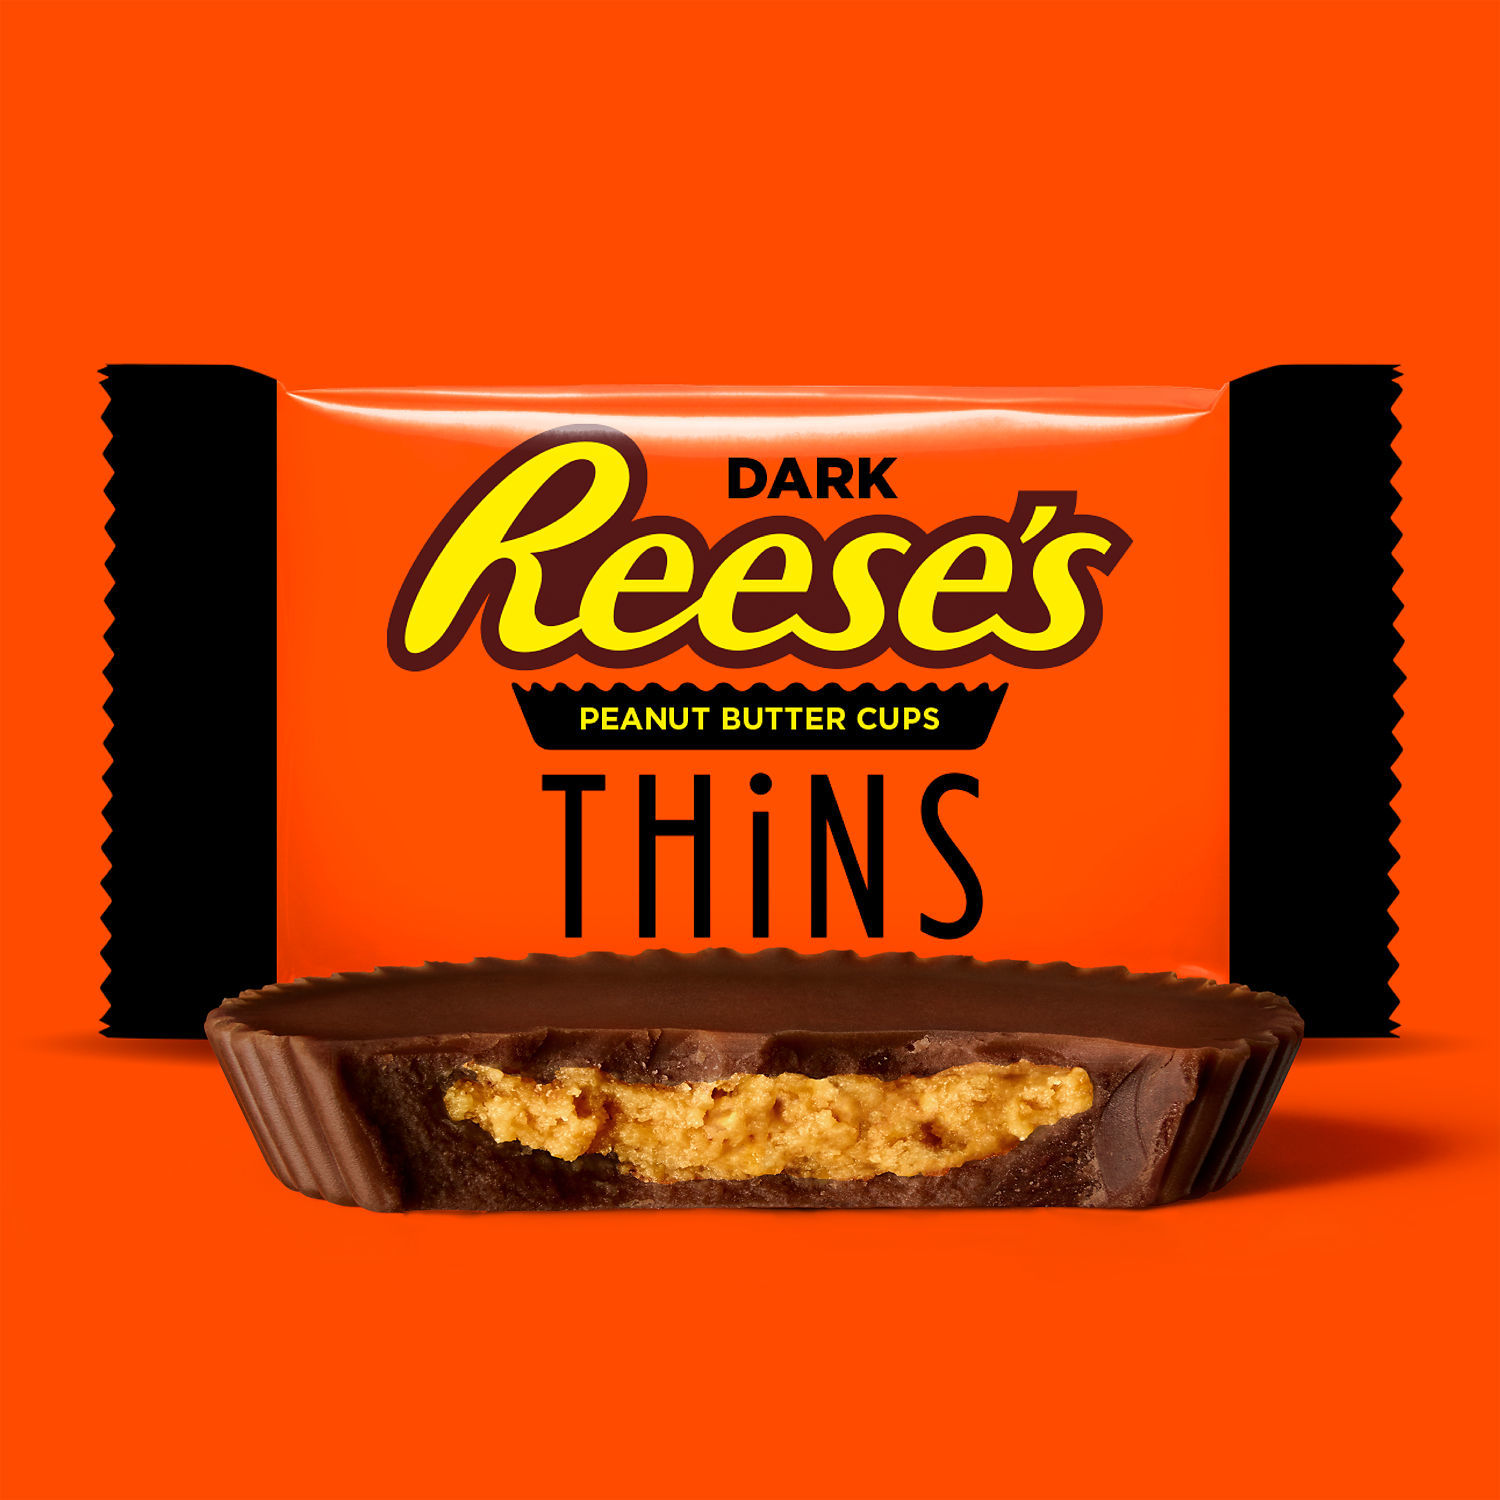 Reese's Thins Dark Chocolate Peanut Butter Cups Candy, Family Pack 12.03 oz - image 3 of 8